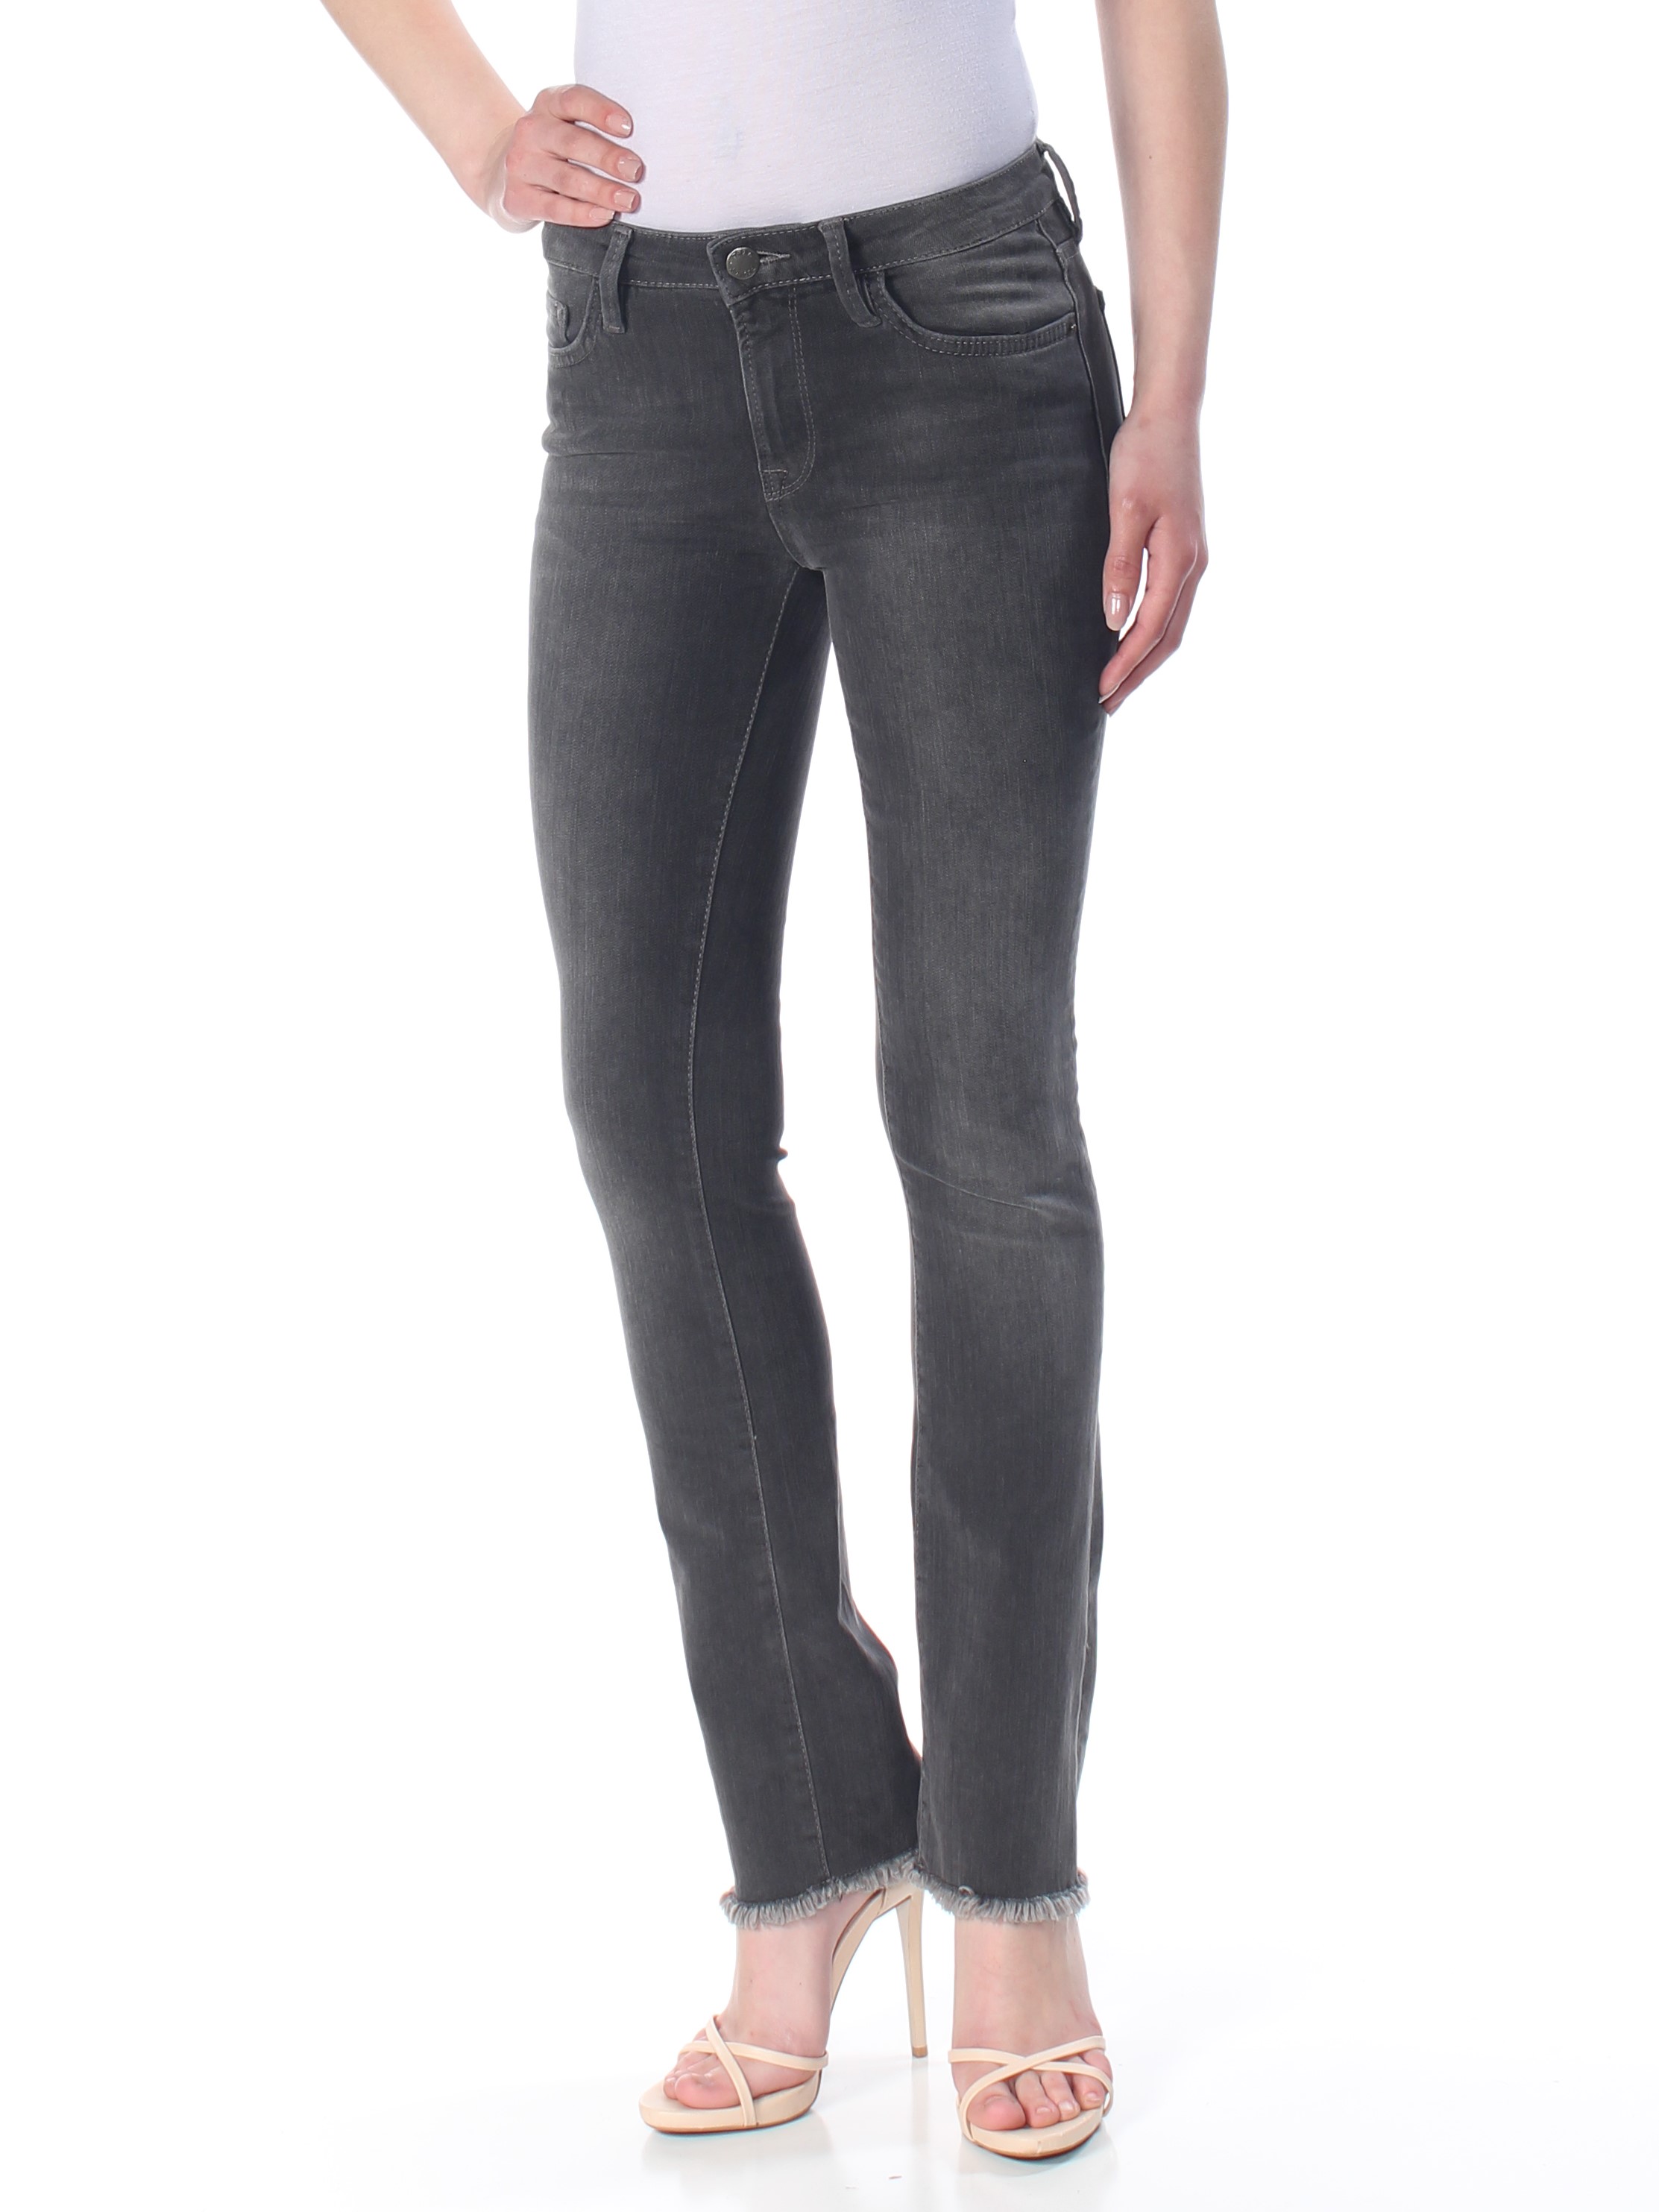 FREE PEOPLE $78 Womens 1052 Black Zippered Pocketed Frayed Skinny Jeans 24 WAIST - image 3 of 4